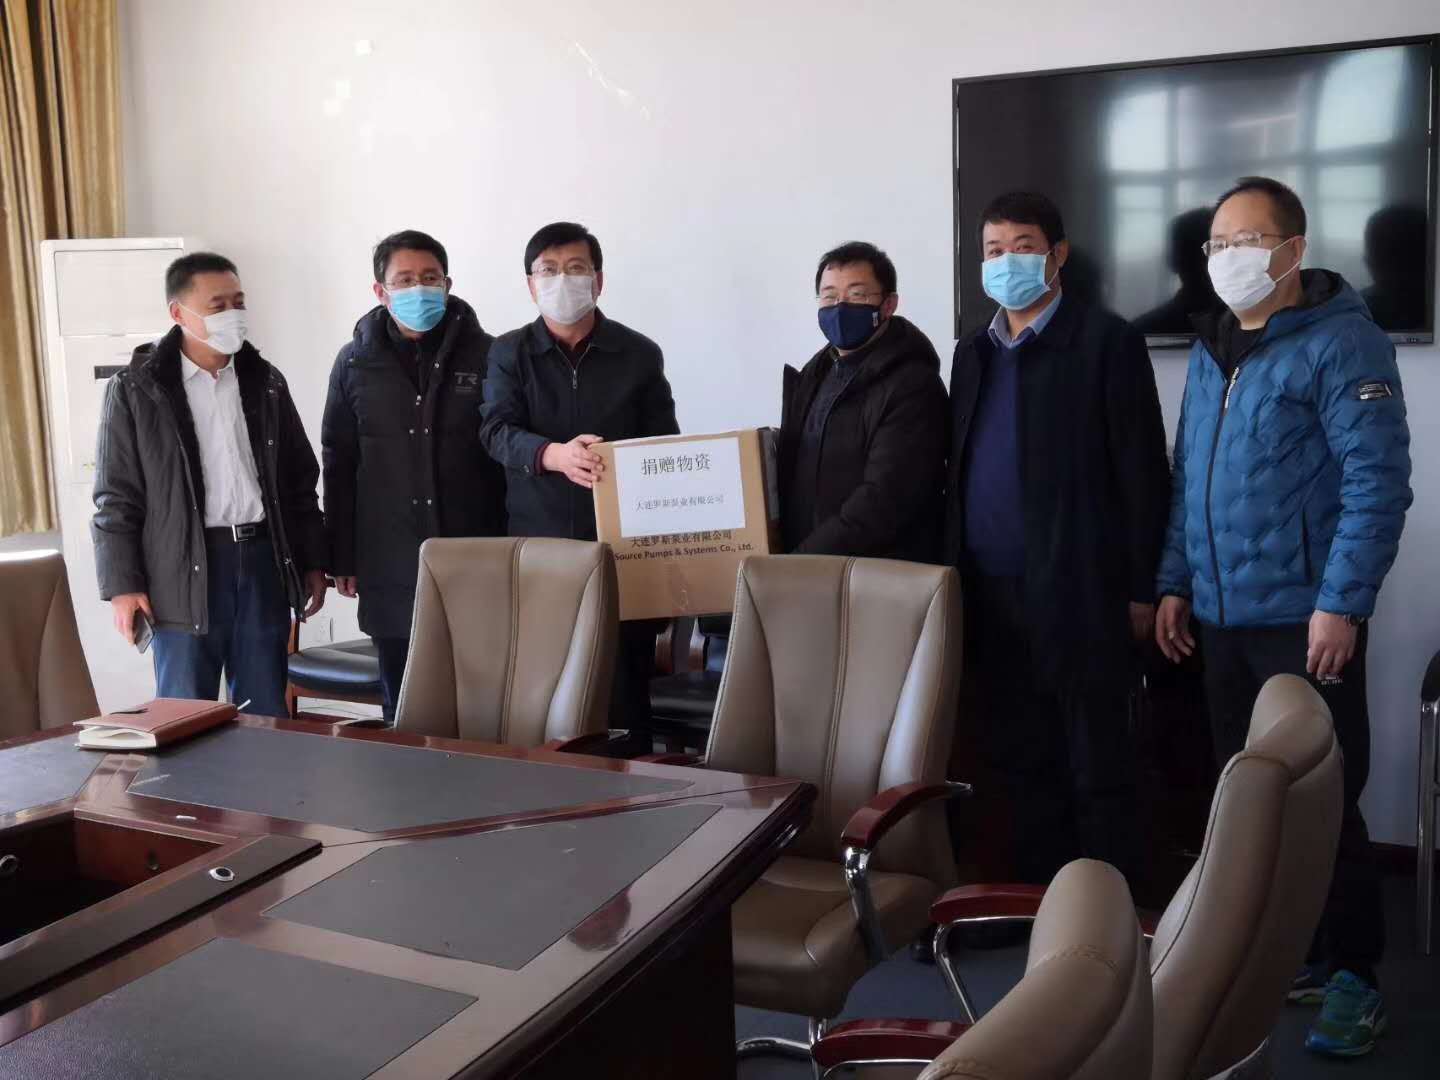 Donate to help the war, Ross is in action - Ross Pump donated 1,000 thermometer guns and 30,000 masks to the Lushun District Government